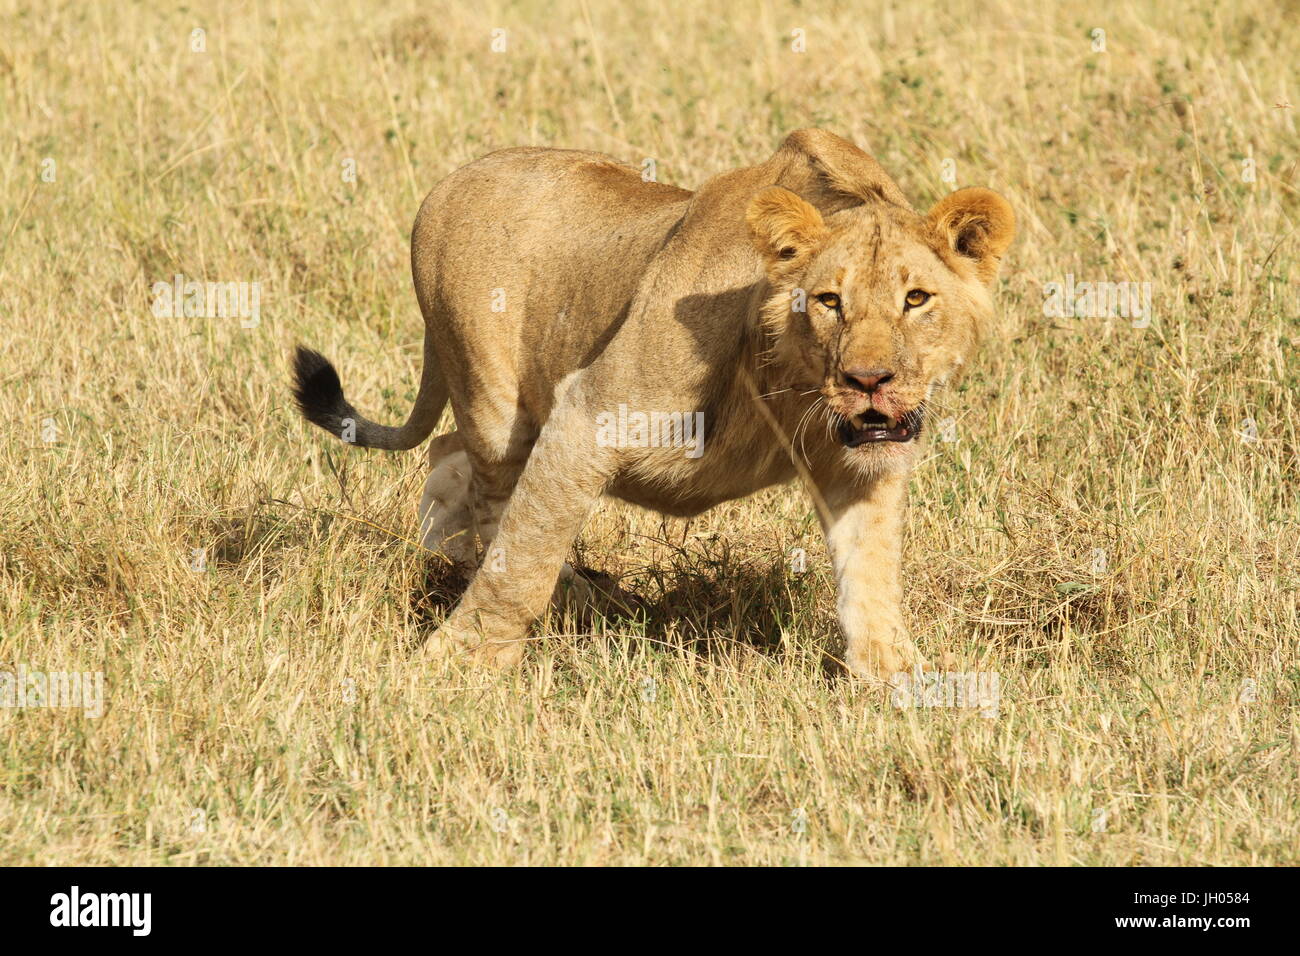 Lion on the prowl Stock Photo